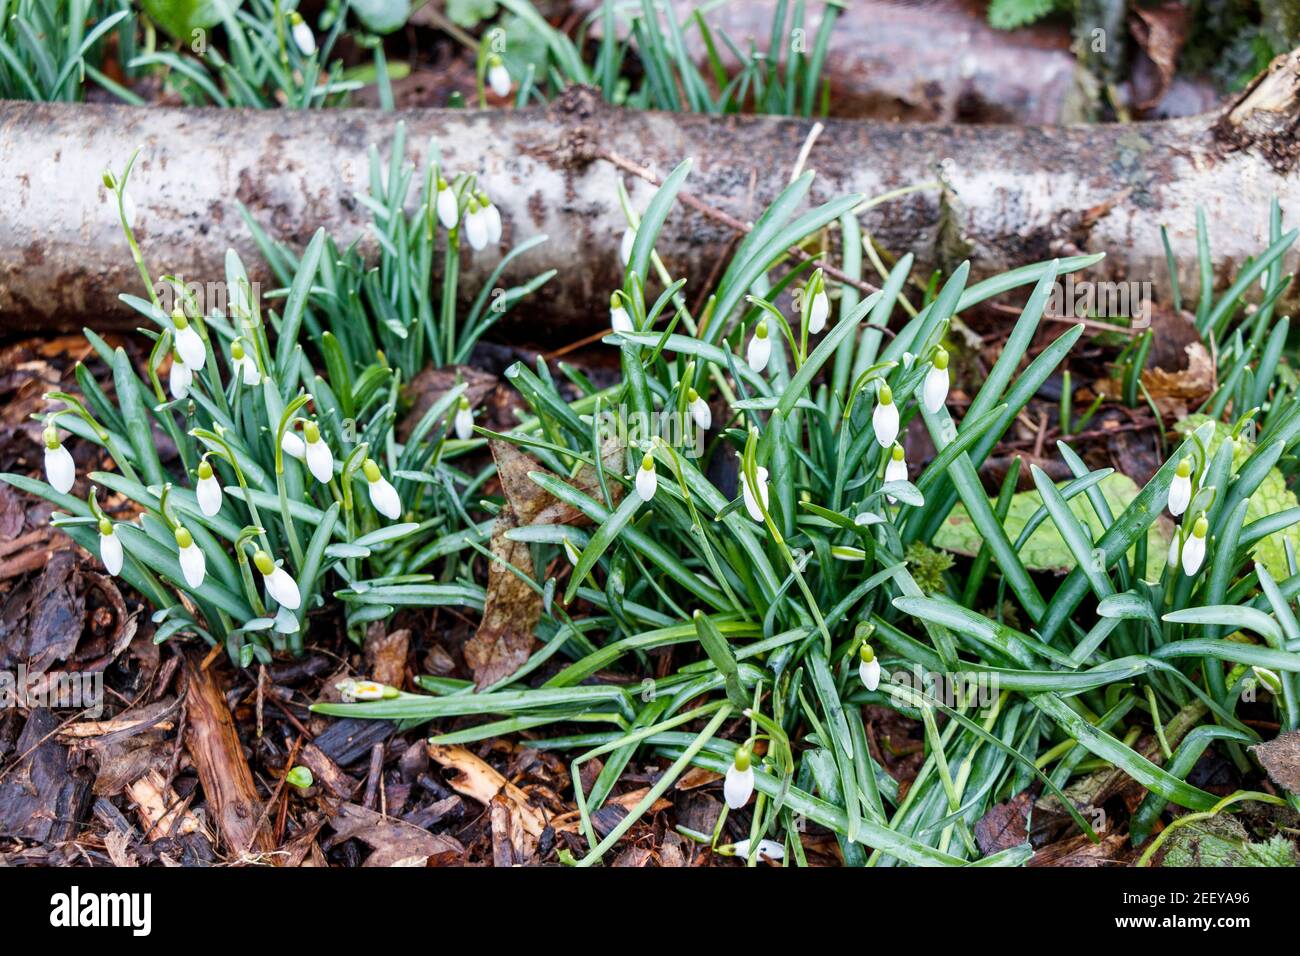 Early snowdrops in Sunnyside Community Gardens as warmer weather encourages earlier flowering, London, UK. Plants are flowering a month earlier in the UK as the climate heats up, a study has found. Stock Photo